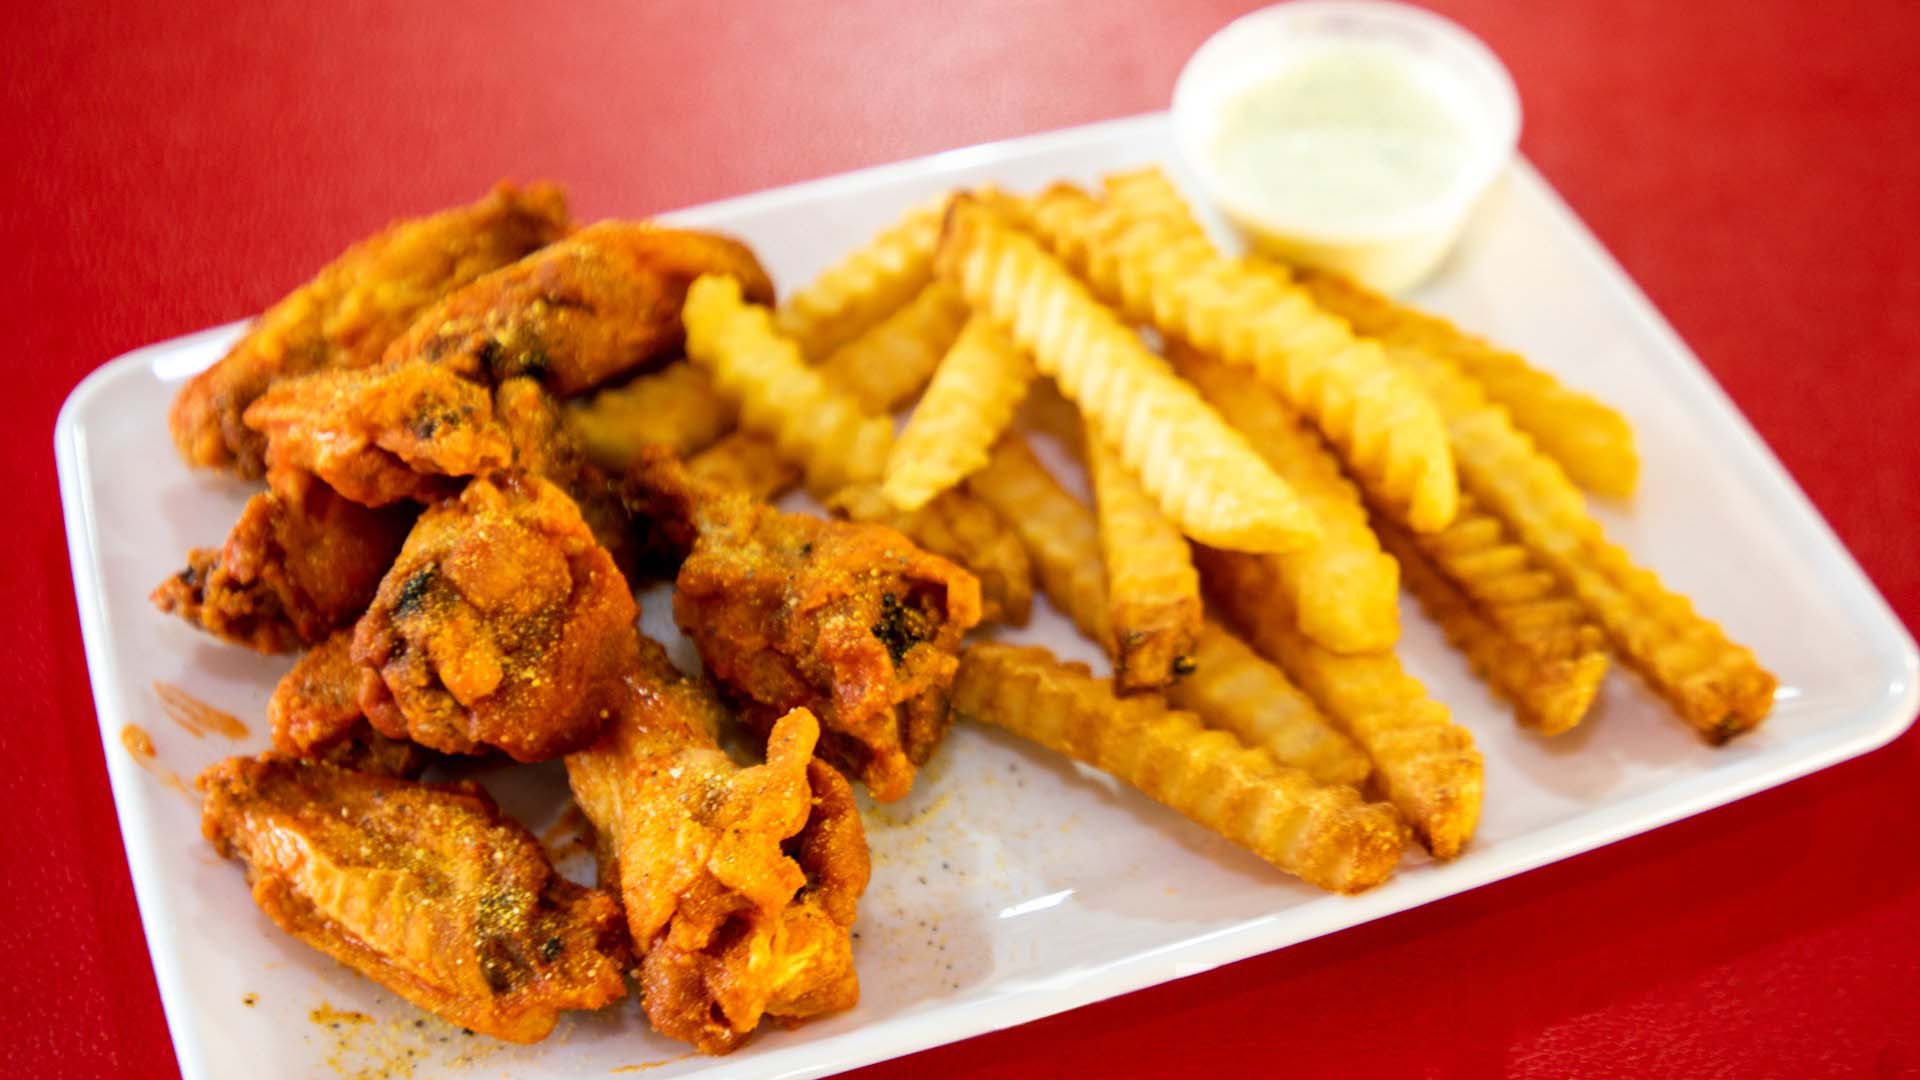 A plate of fried chicken wings with crinkle-cut fries and a side of dipping sauce on a red table.